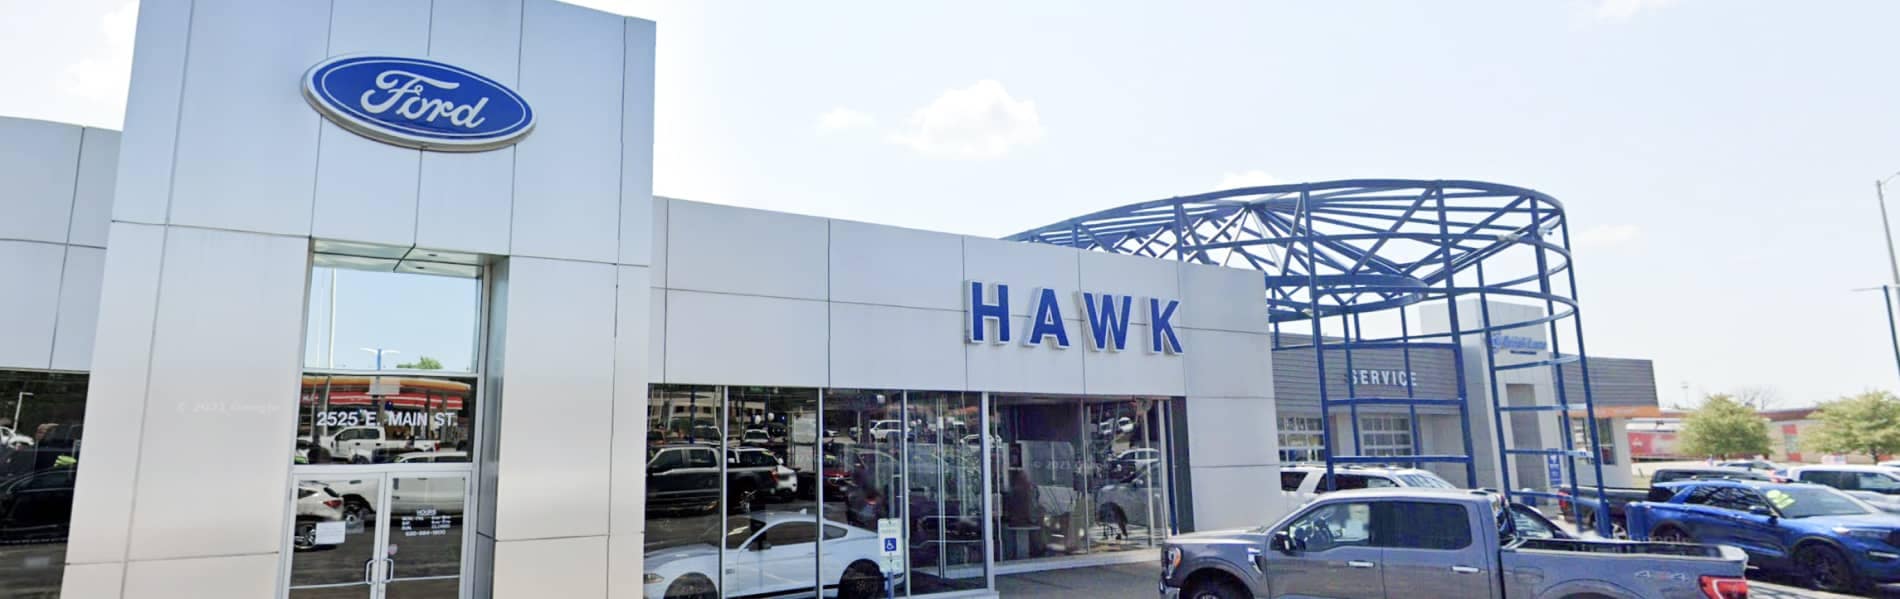 Hawk Ford of St. Charles exterior view